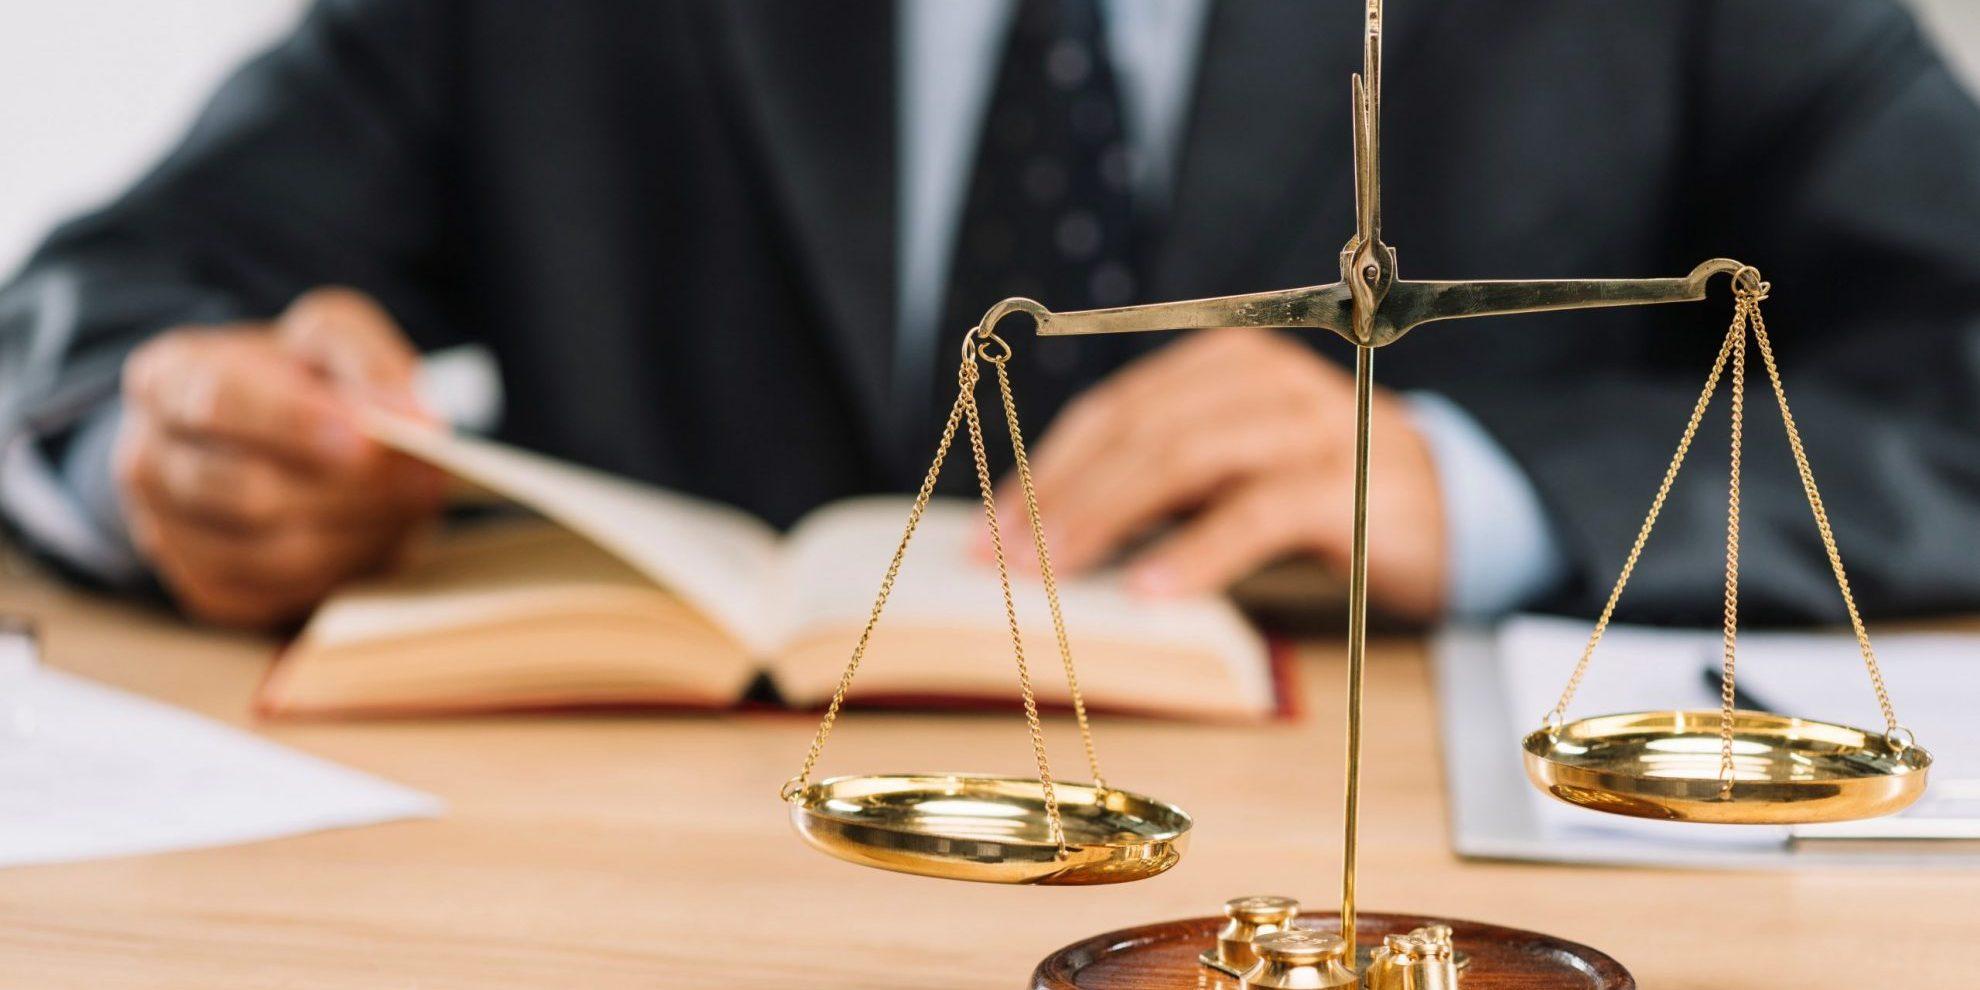 How to Evaluate Law Firms and Make the Right Choice